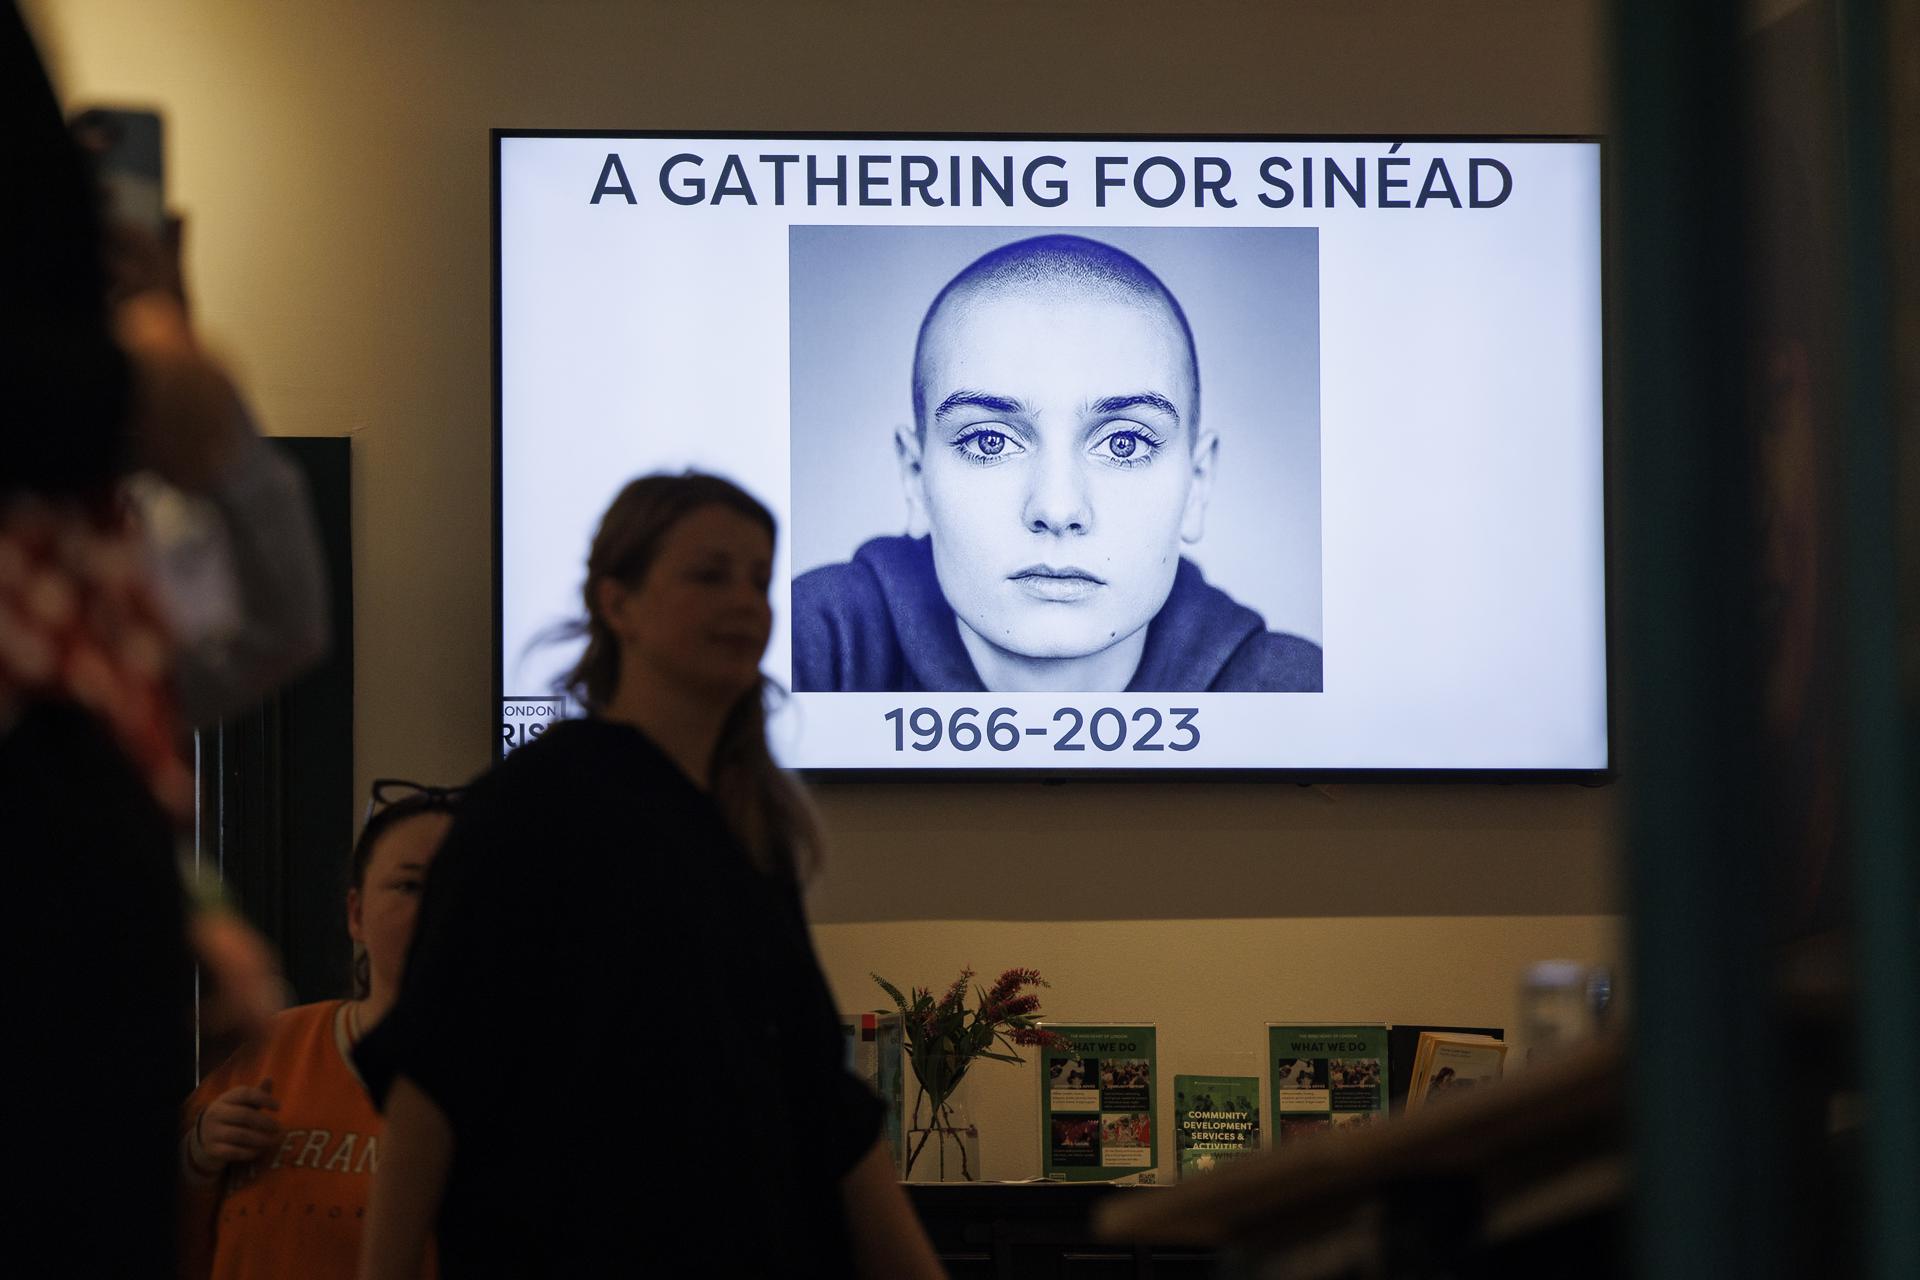 Hundreds of people attend a private event on 27 July 2023 in London to pay tribute to late Irish singer Sinead O'Connor. EFE/Tolga Akmen